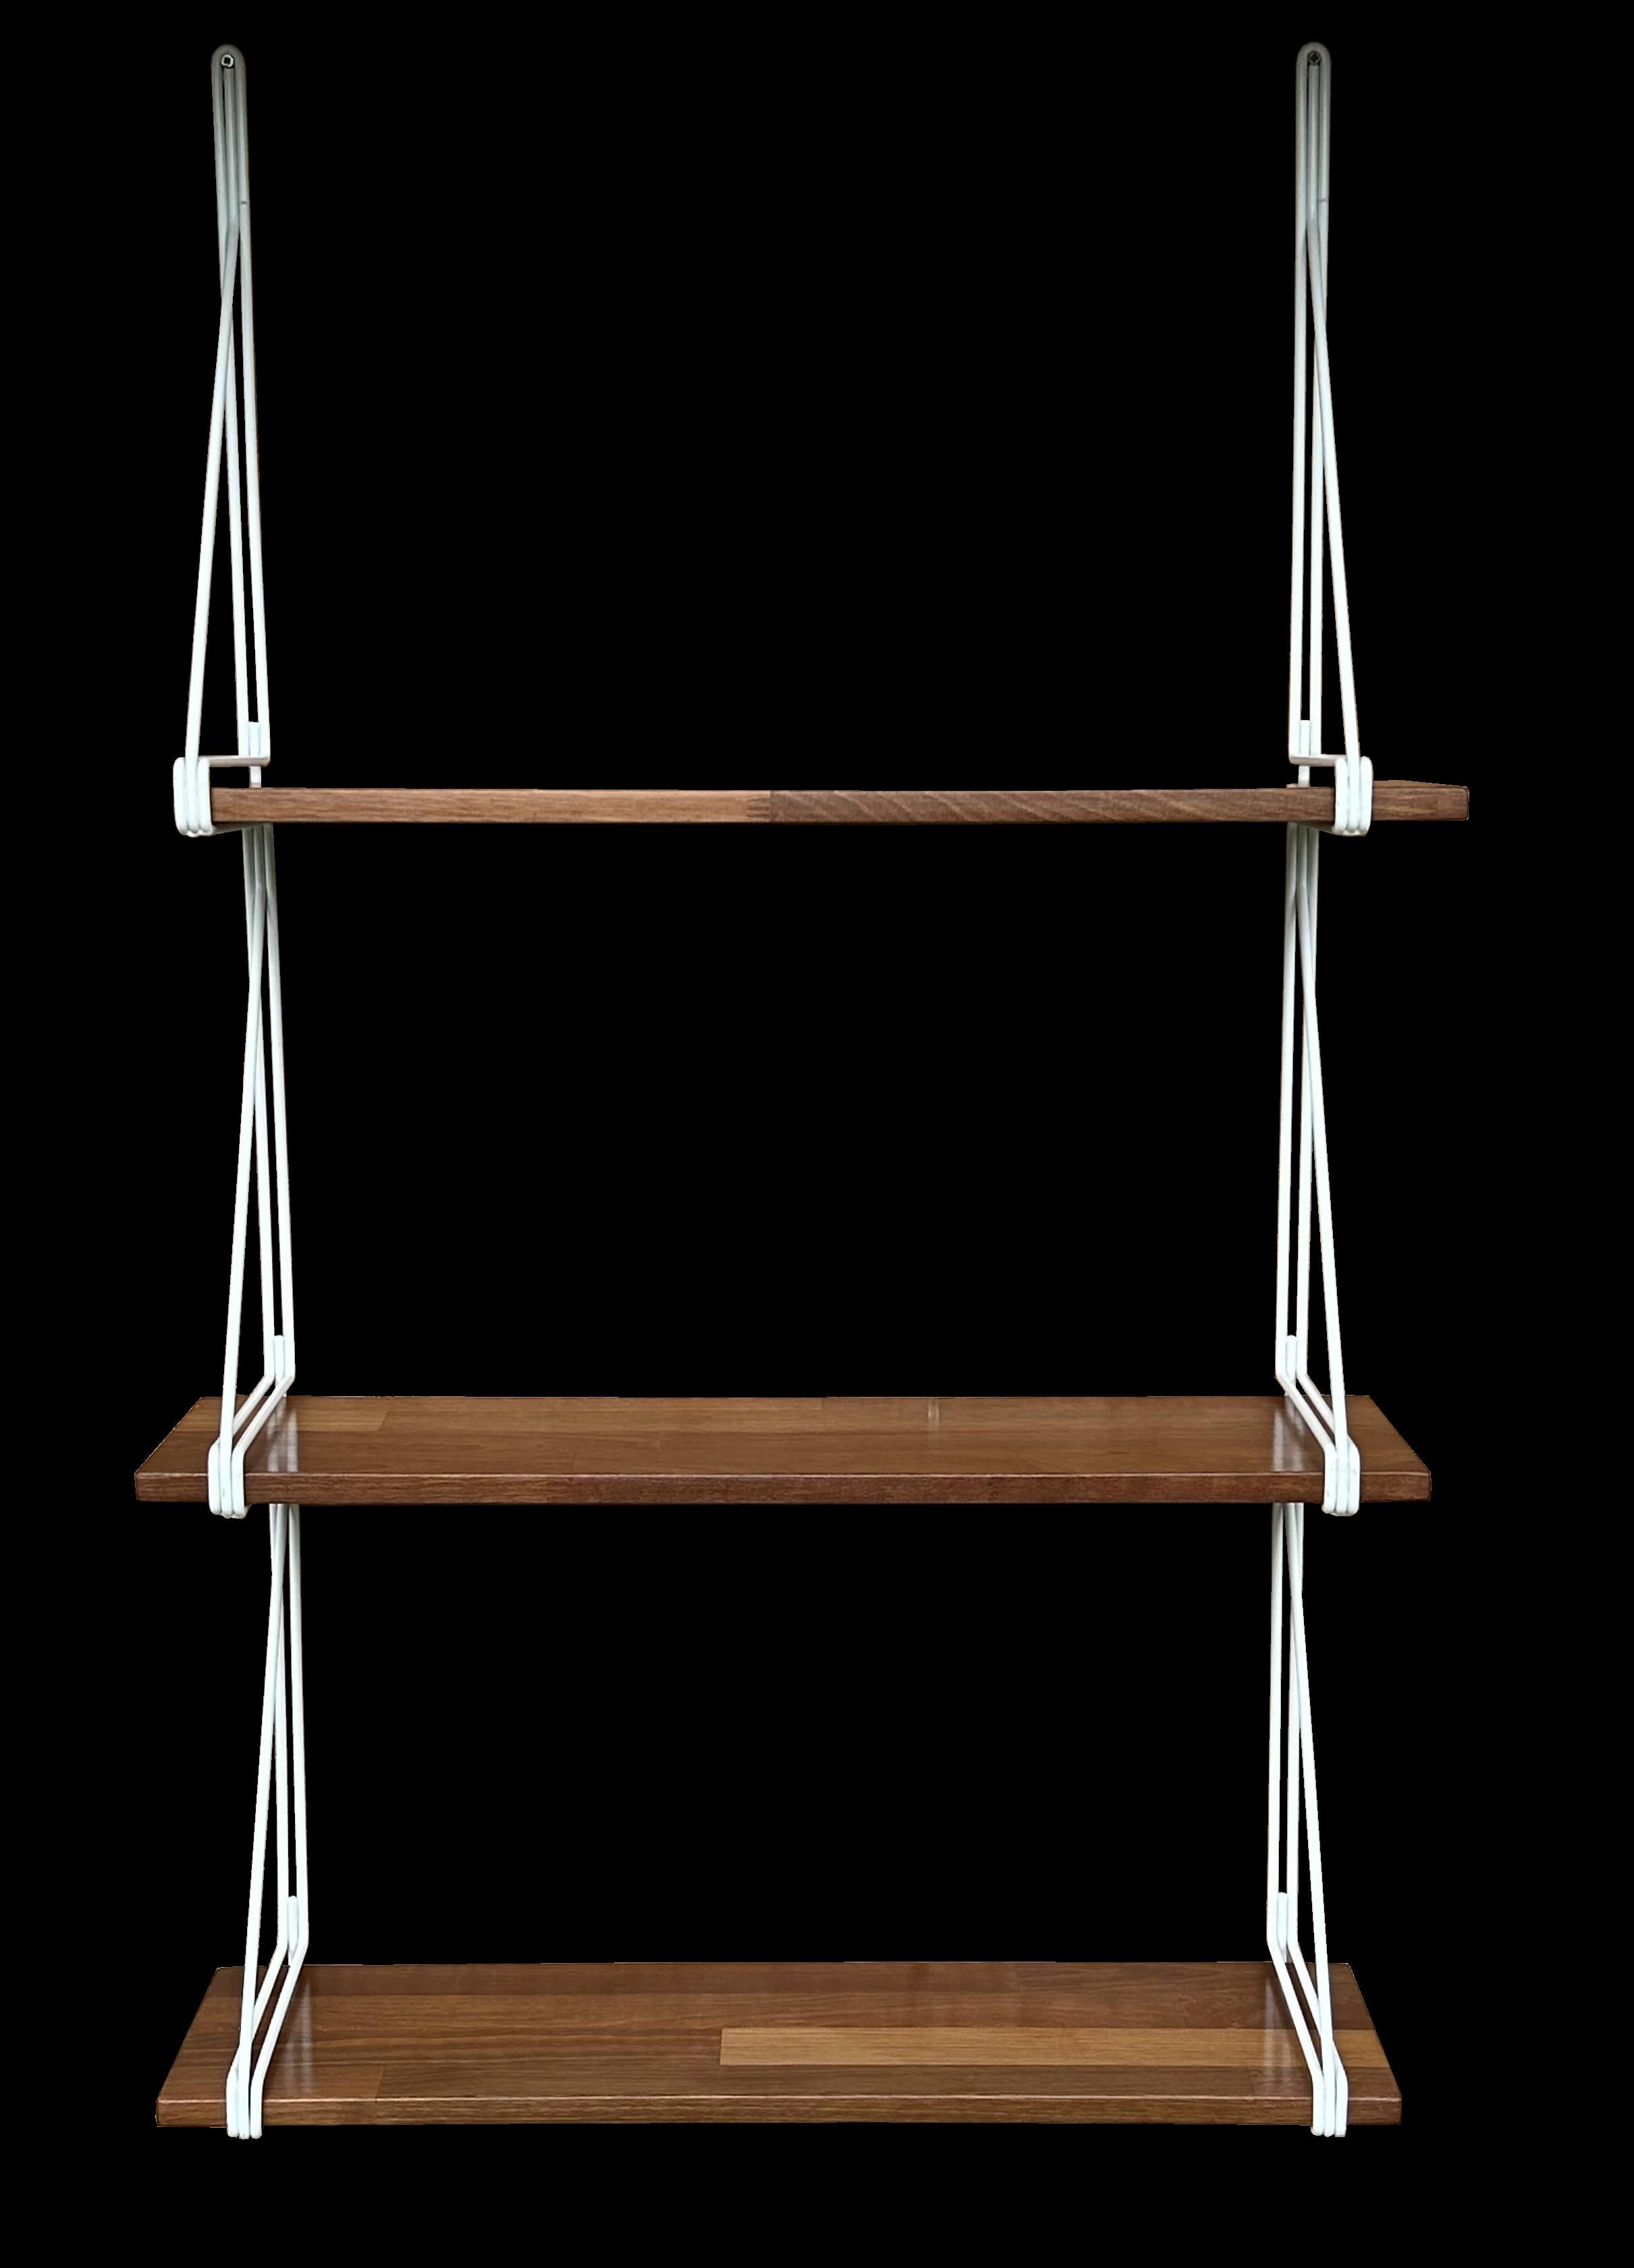 A set of 3 teak shelves supported by white coated steel brackets, nicely desgned so that only 2 screws are needed each side to hold 3 shelves.